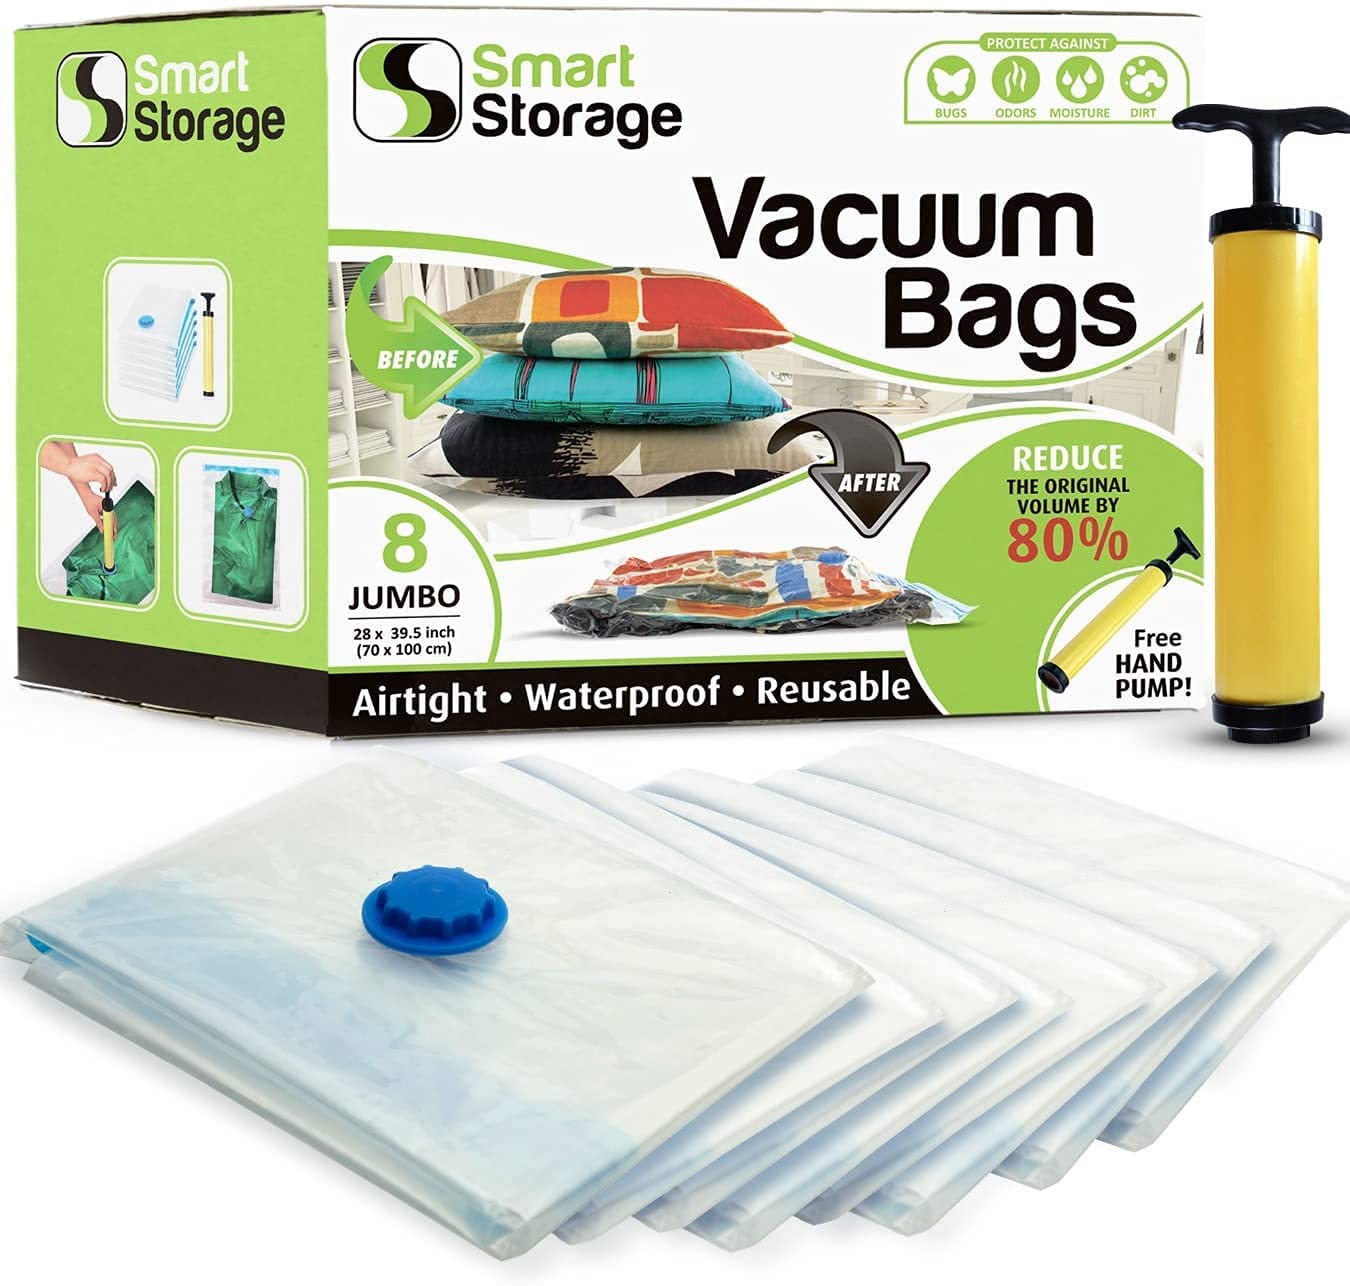  18 Space Saver Vacuum Storage Bags, Vacuum Sealed Storage Bags  (4 Jumbo/4 Large/4 Medium/6 Small) with Hand Pump, Vacuum Seal Bags for  Clothing, Comforters, Pillows, Towel, Blanket Storage, Bedding : Home